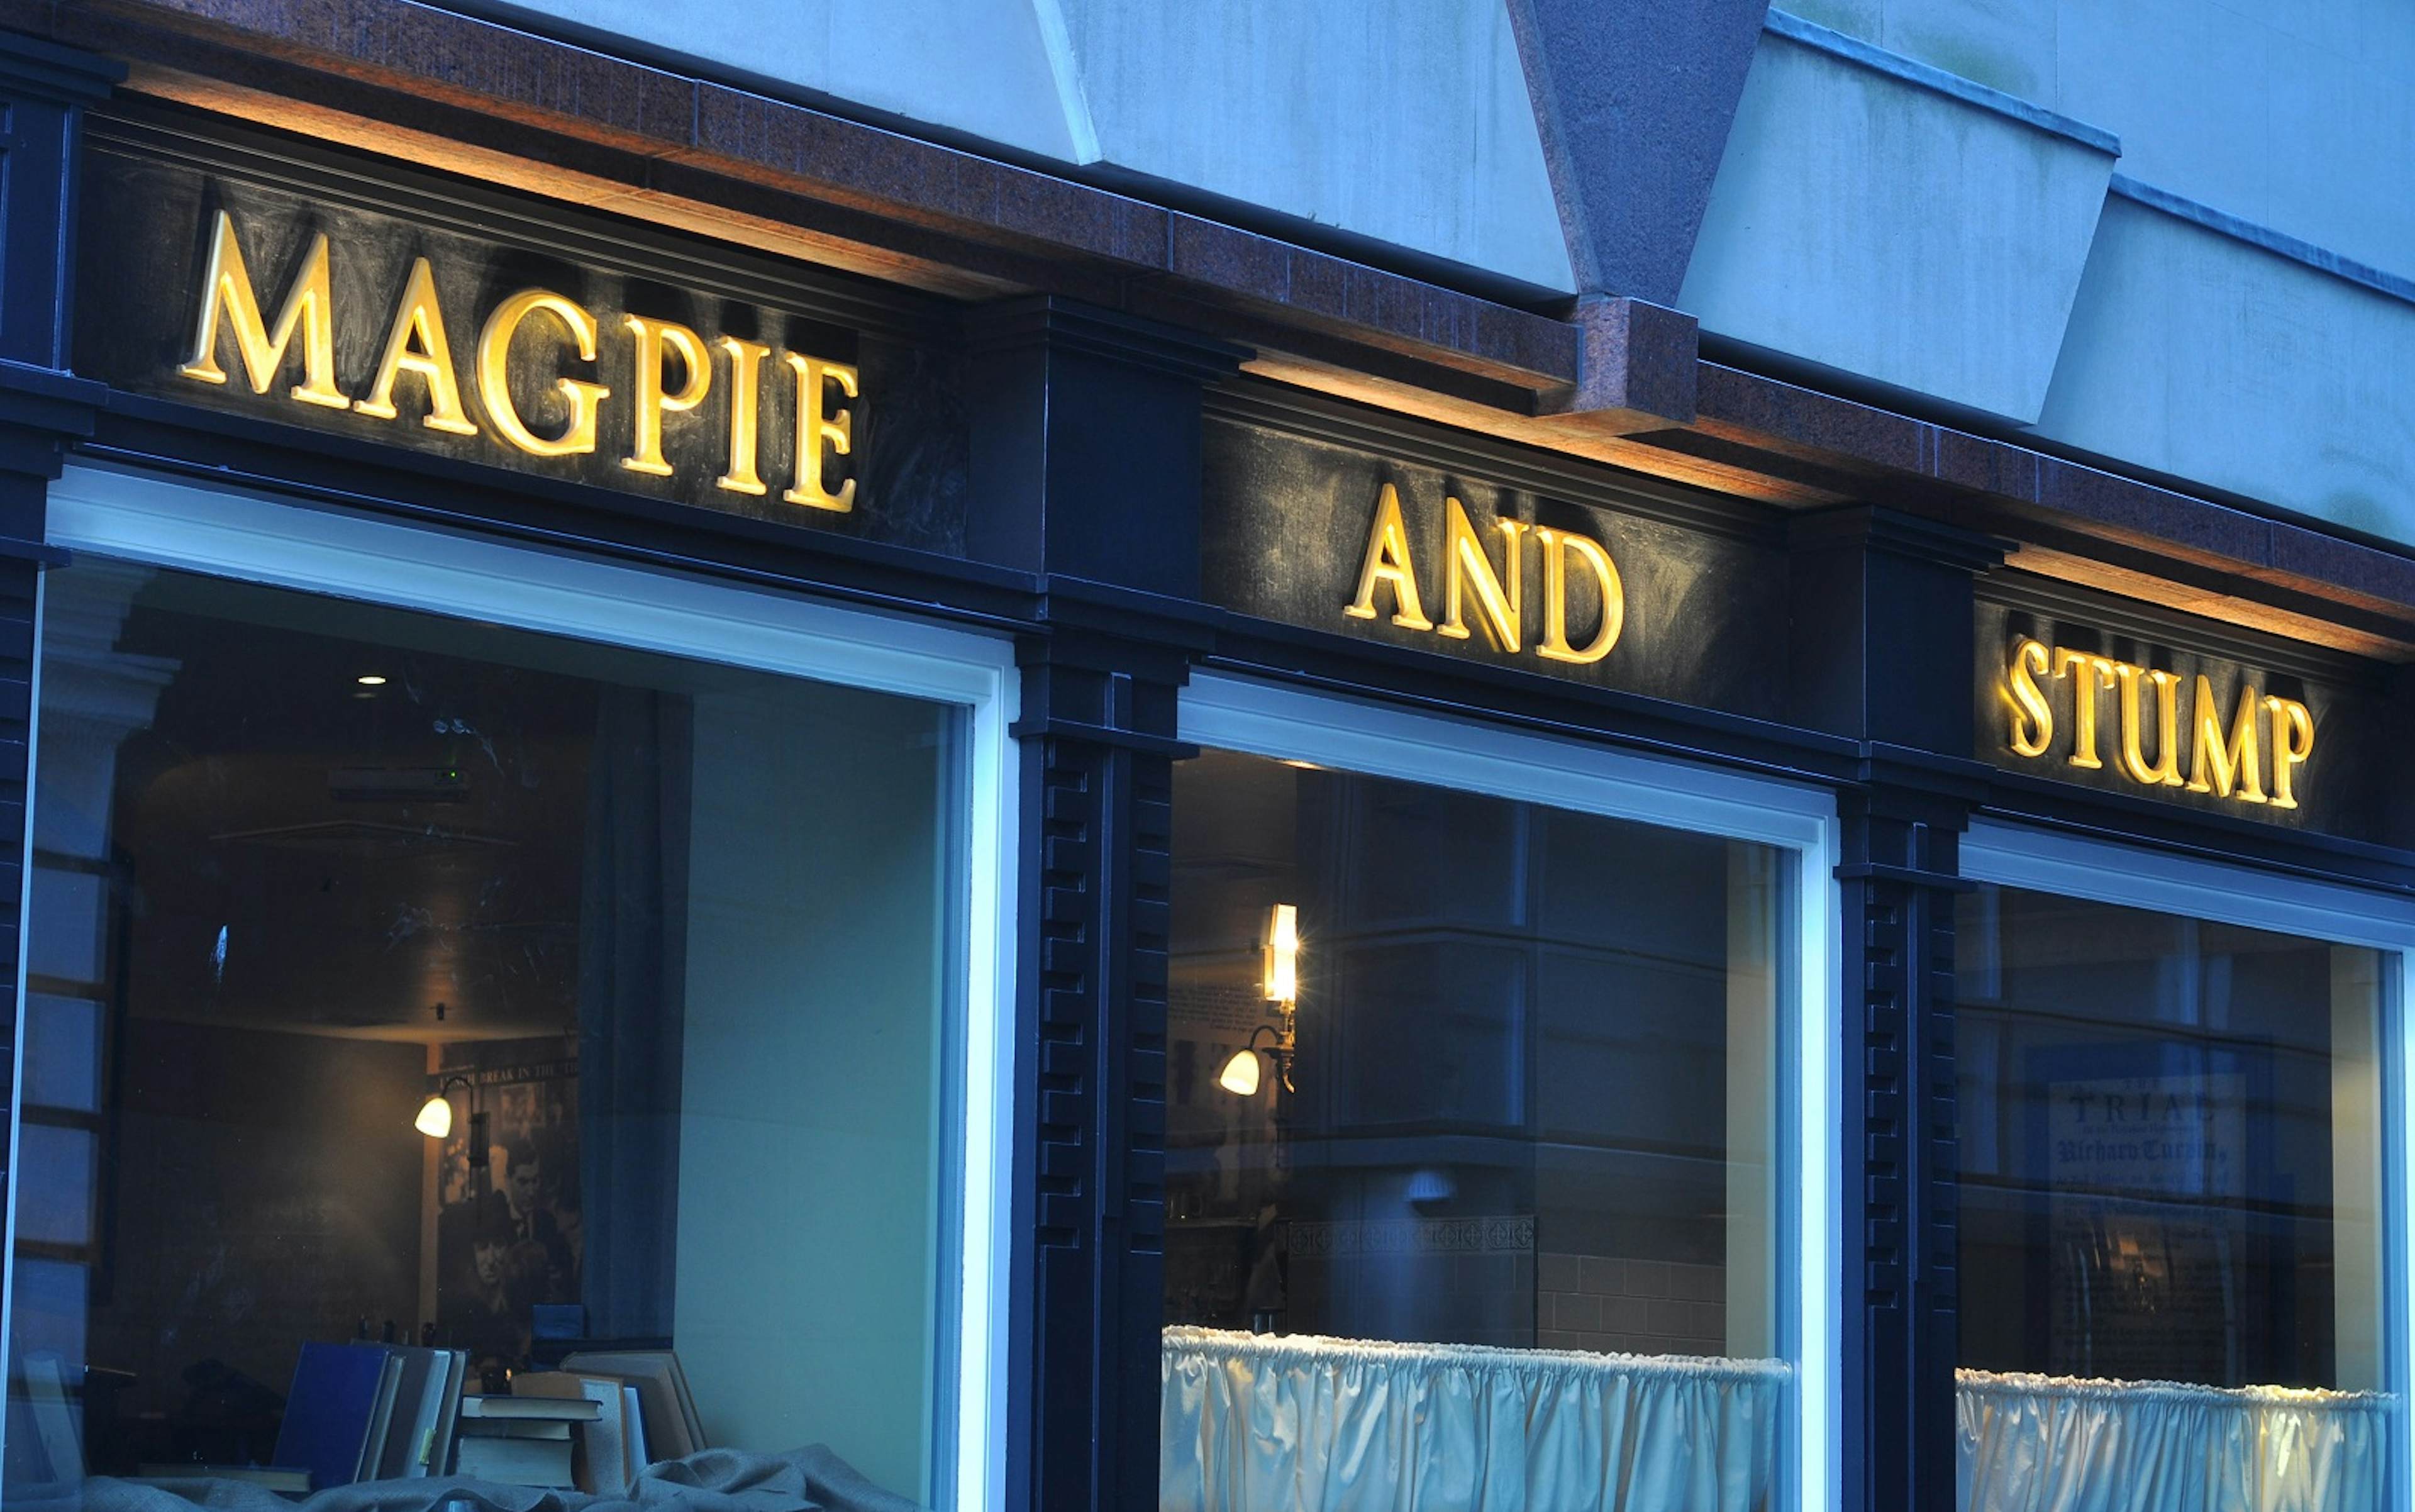 Magpie & Stump - Old Bailey Bar image 1